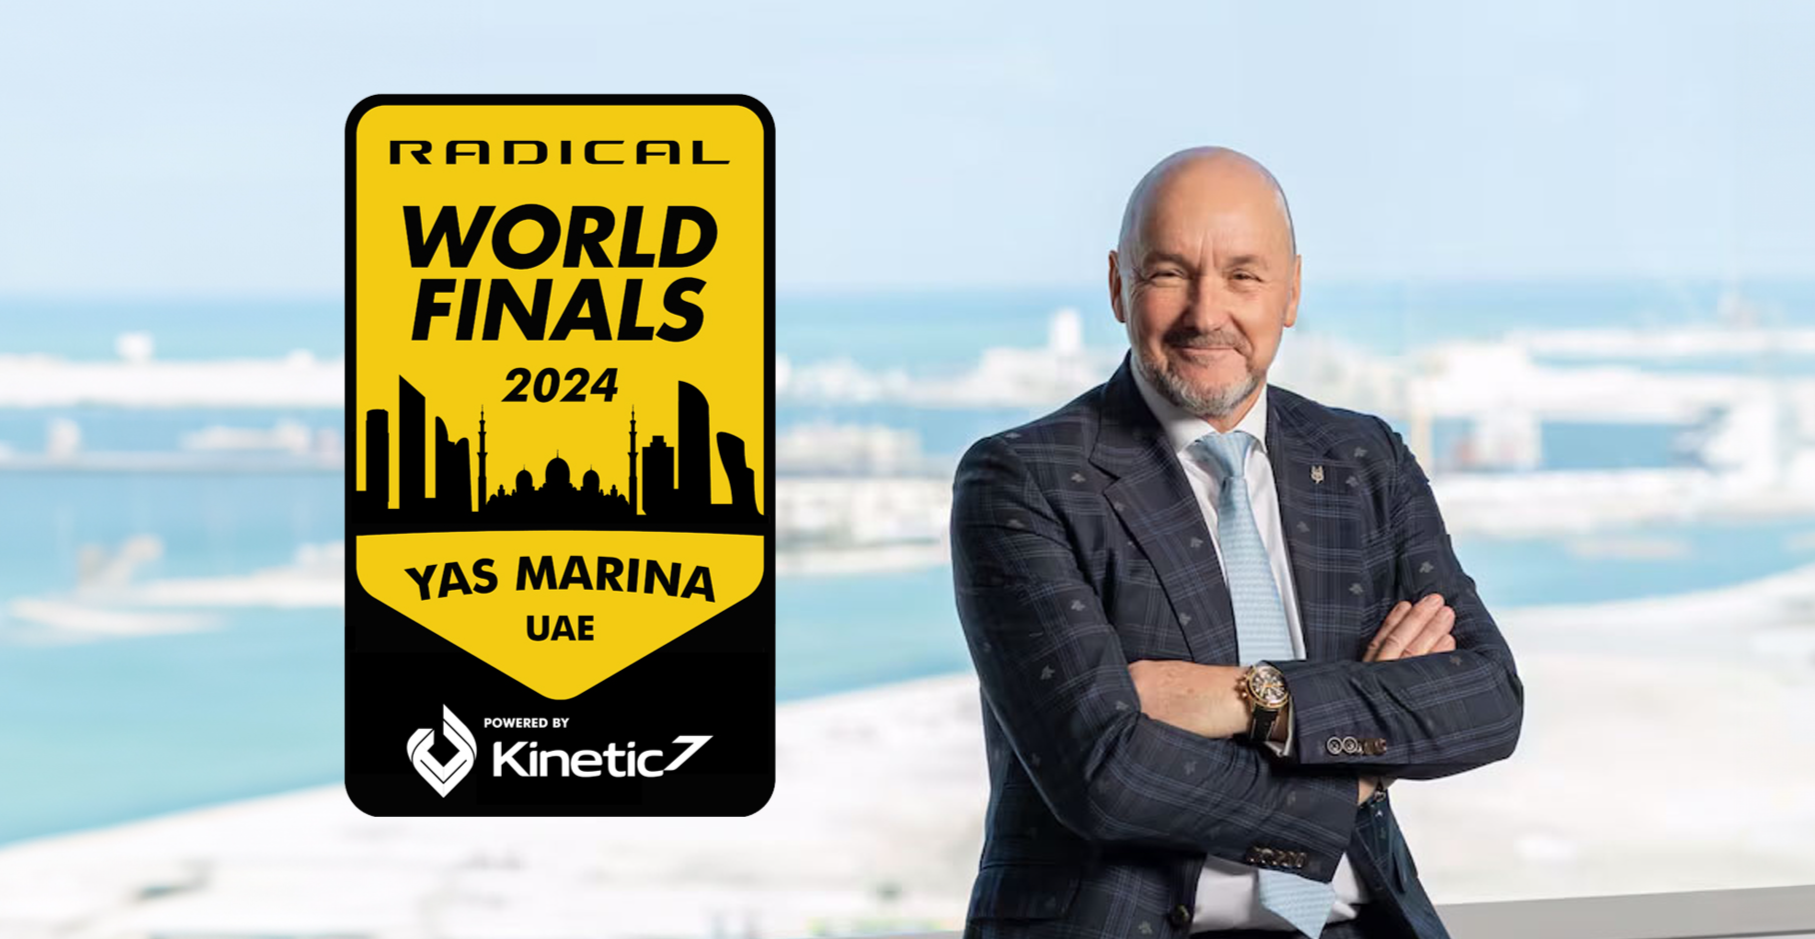 Kinetic 7 Announced as Title Sponsor for Radical World Finals 2024